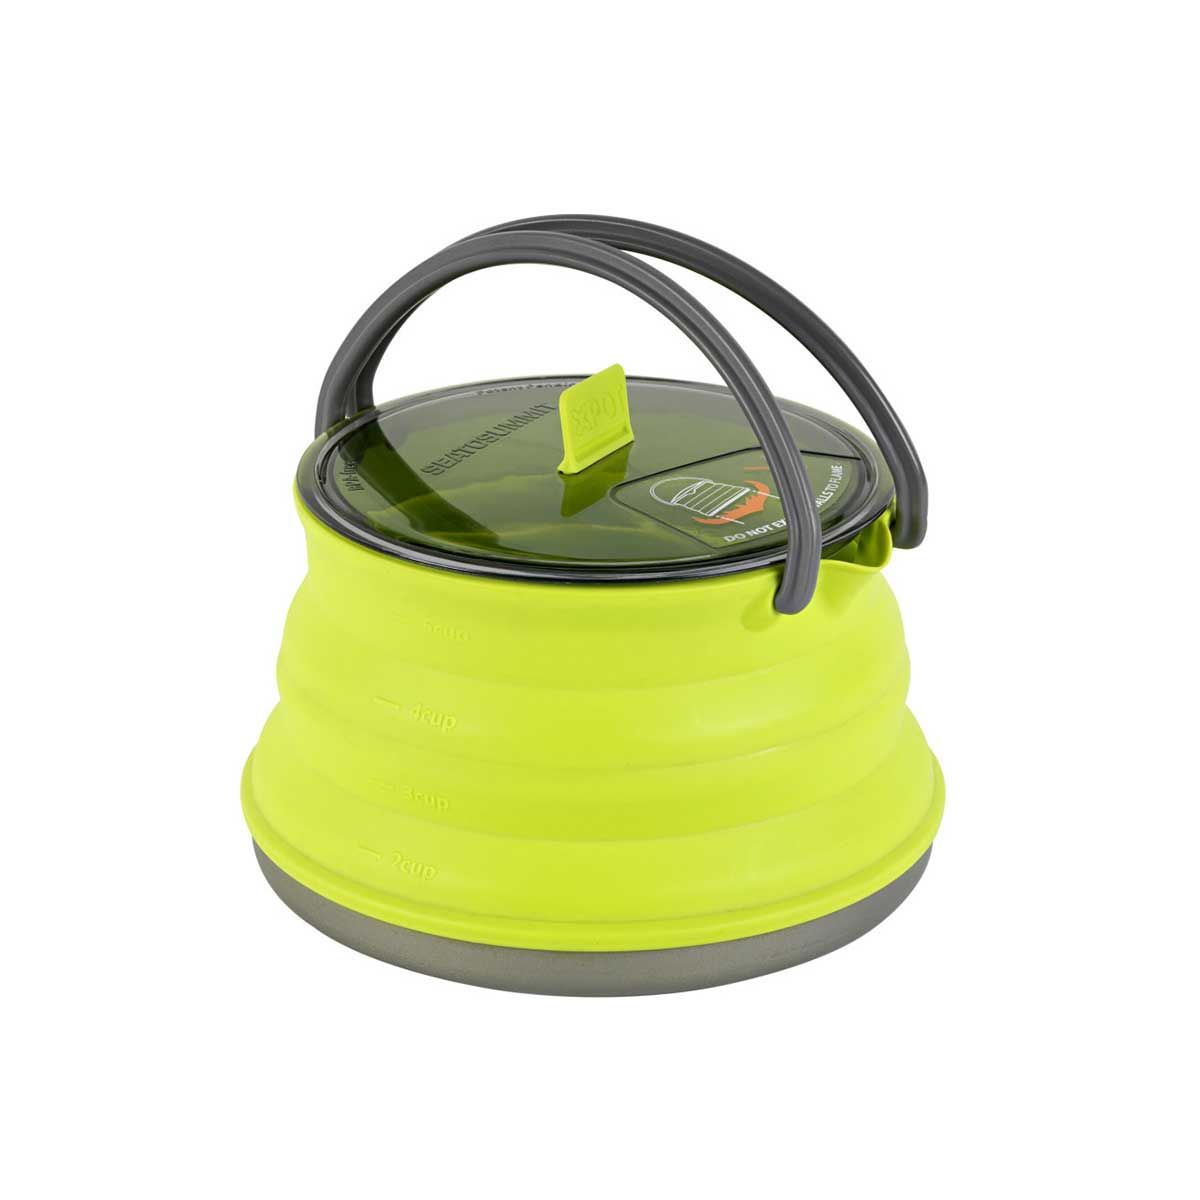 Sea to Summit collapsible kettle X-Kettle 1.3L